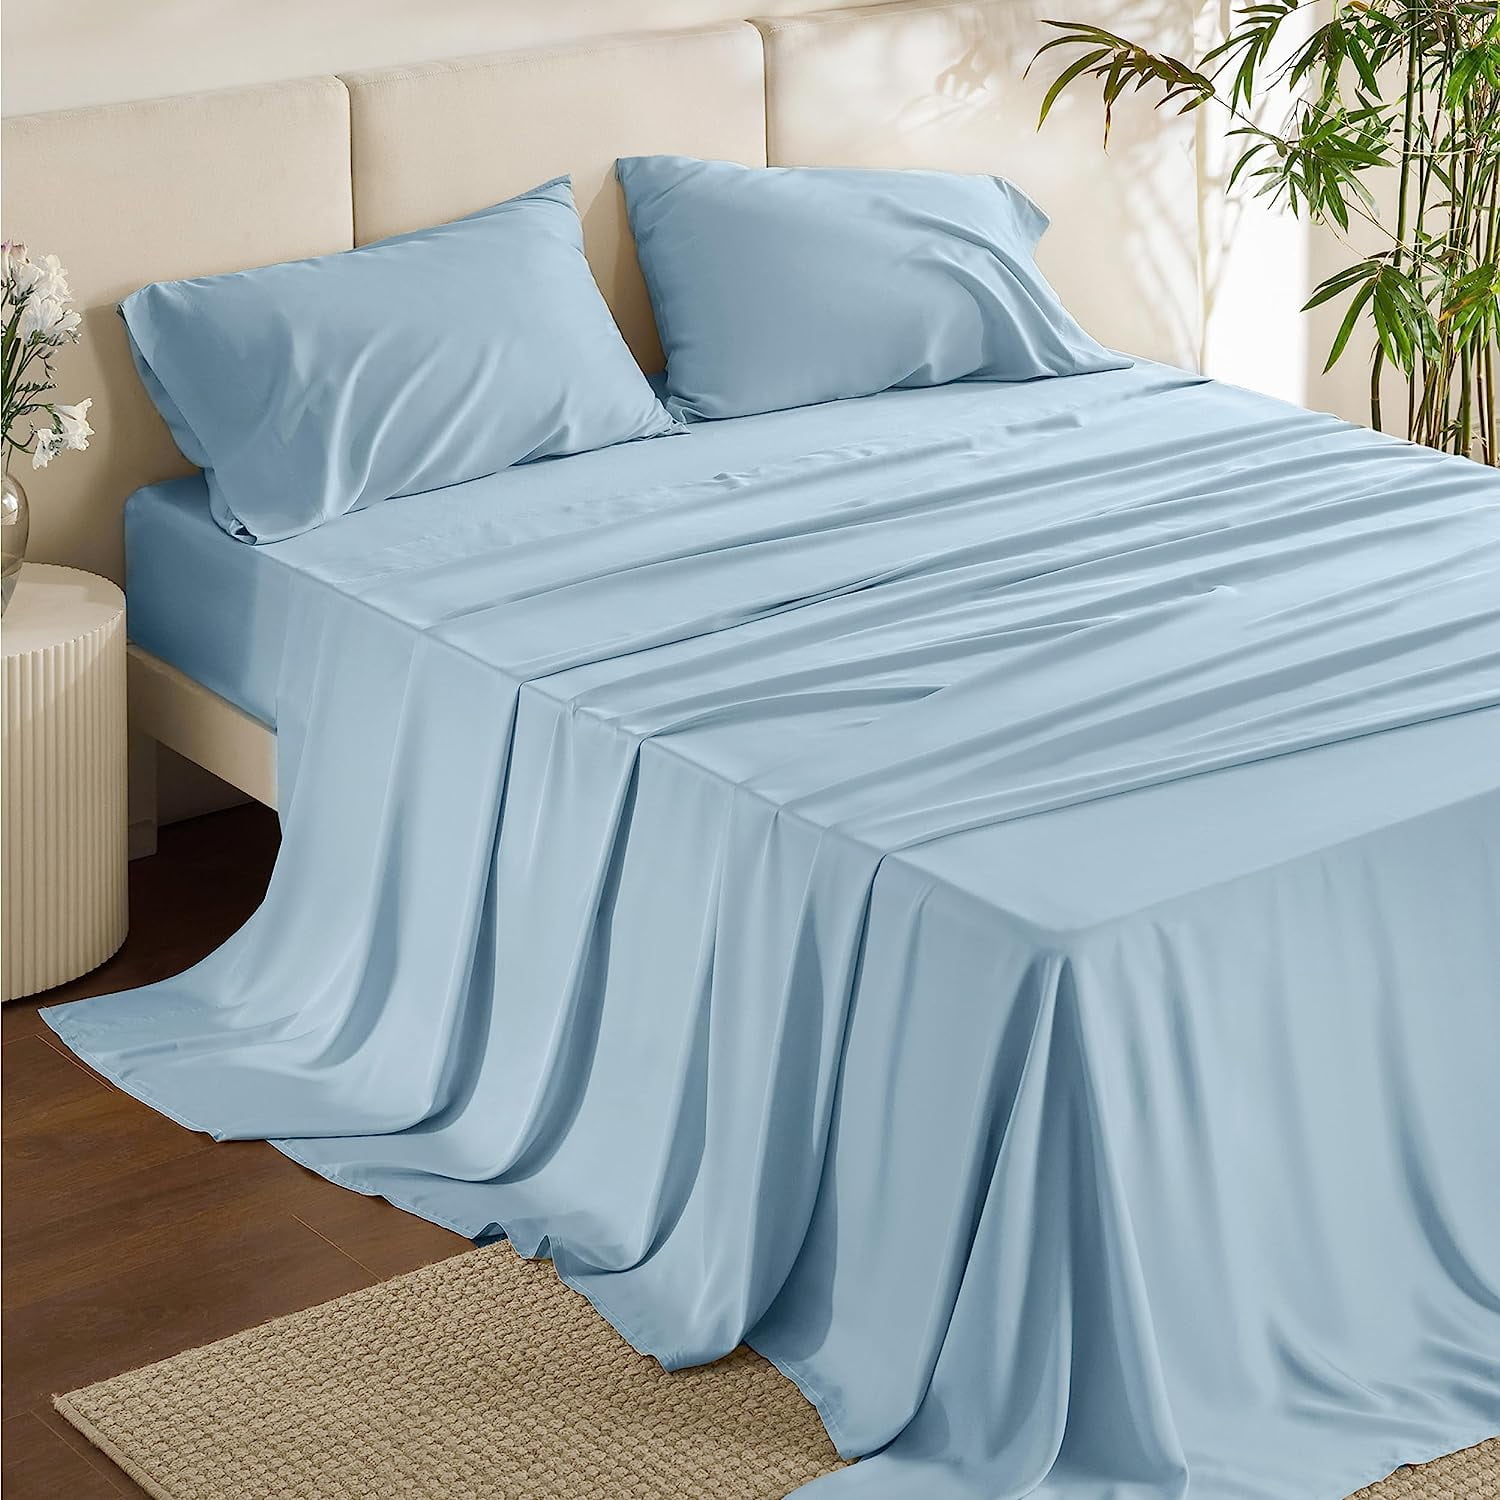 Bedsure Twin Cooling Bed Sheets Set, Rayon Derived from Bamboo